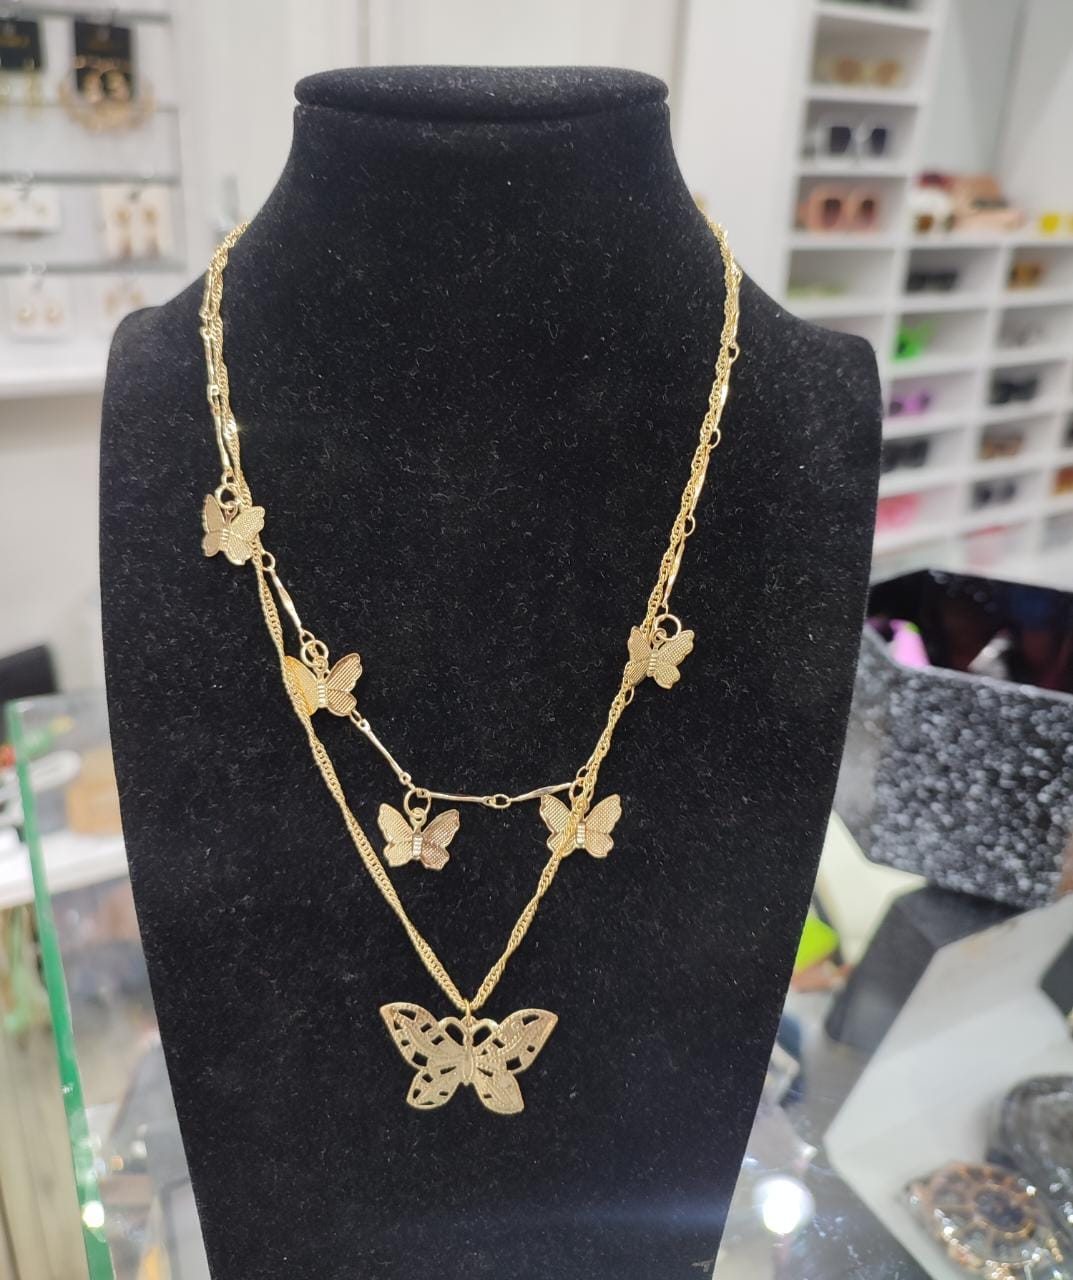 Chain women necklaces butterfly